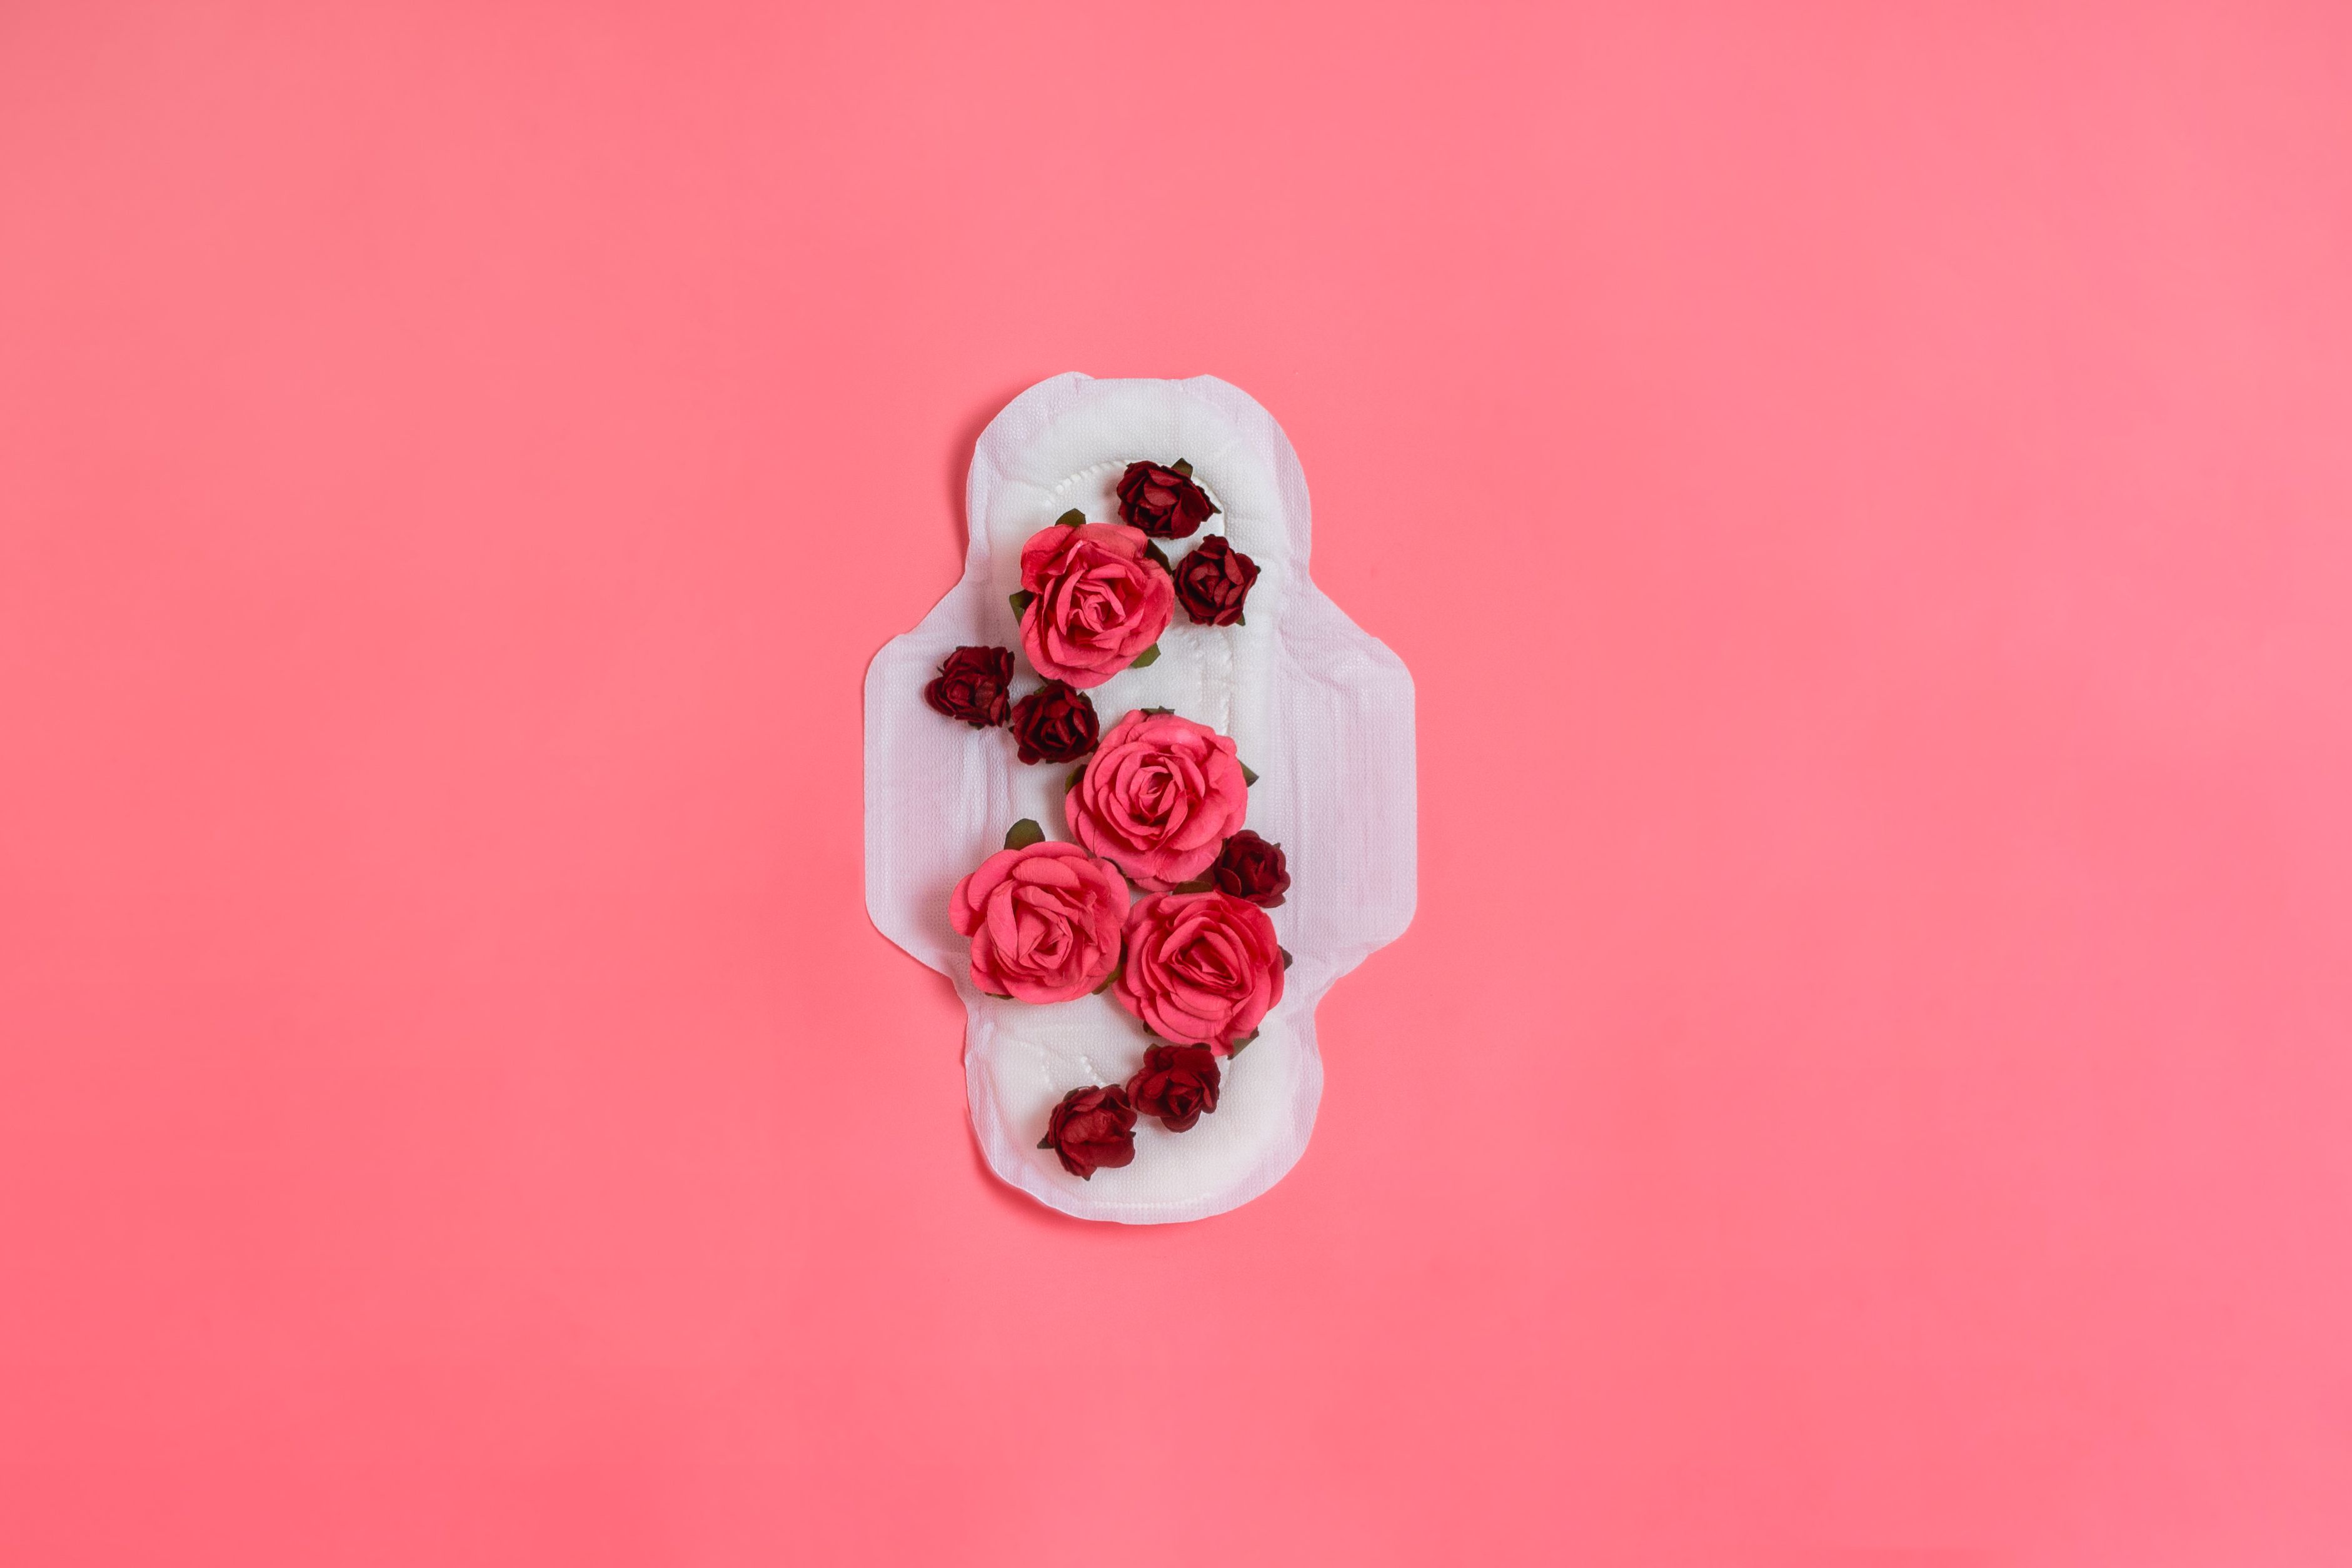 Period Won't Stop: Causes, Treatment, and More